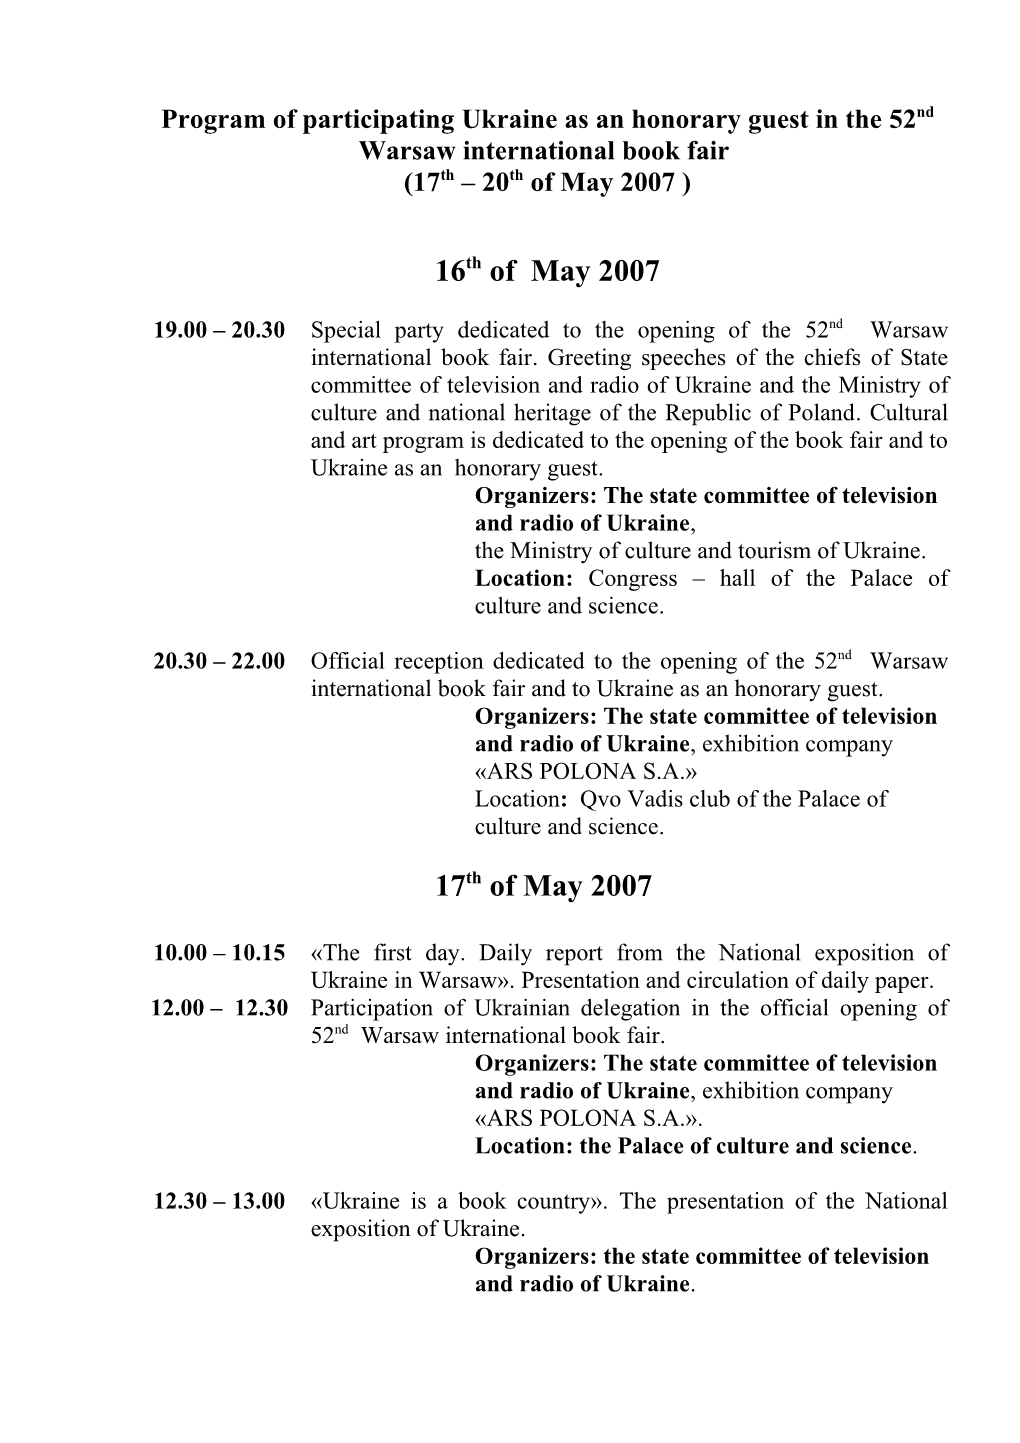 Program of Participating Ukraine As an Honorary Guest in The52nd Warsaw International